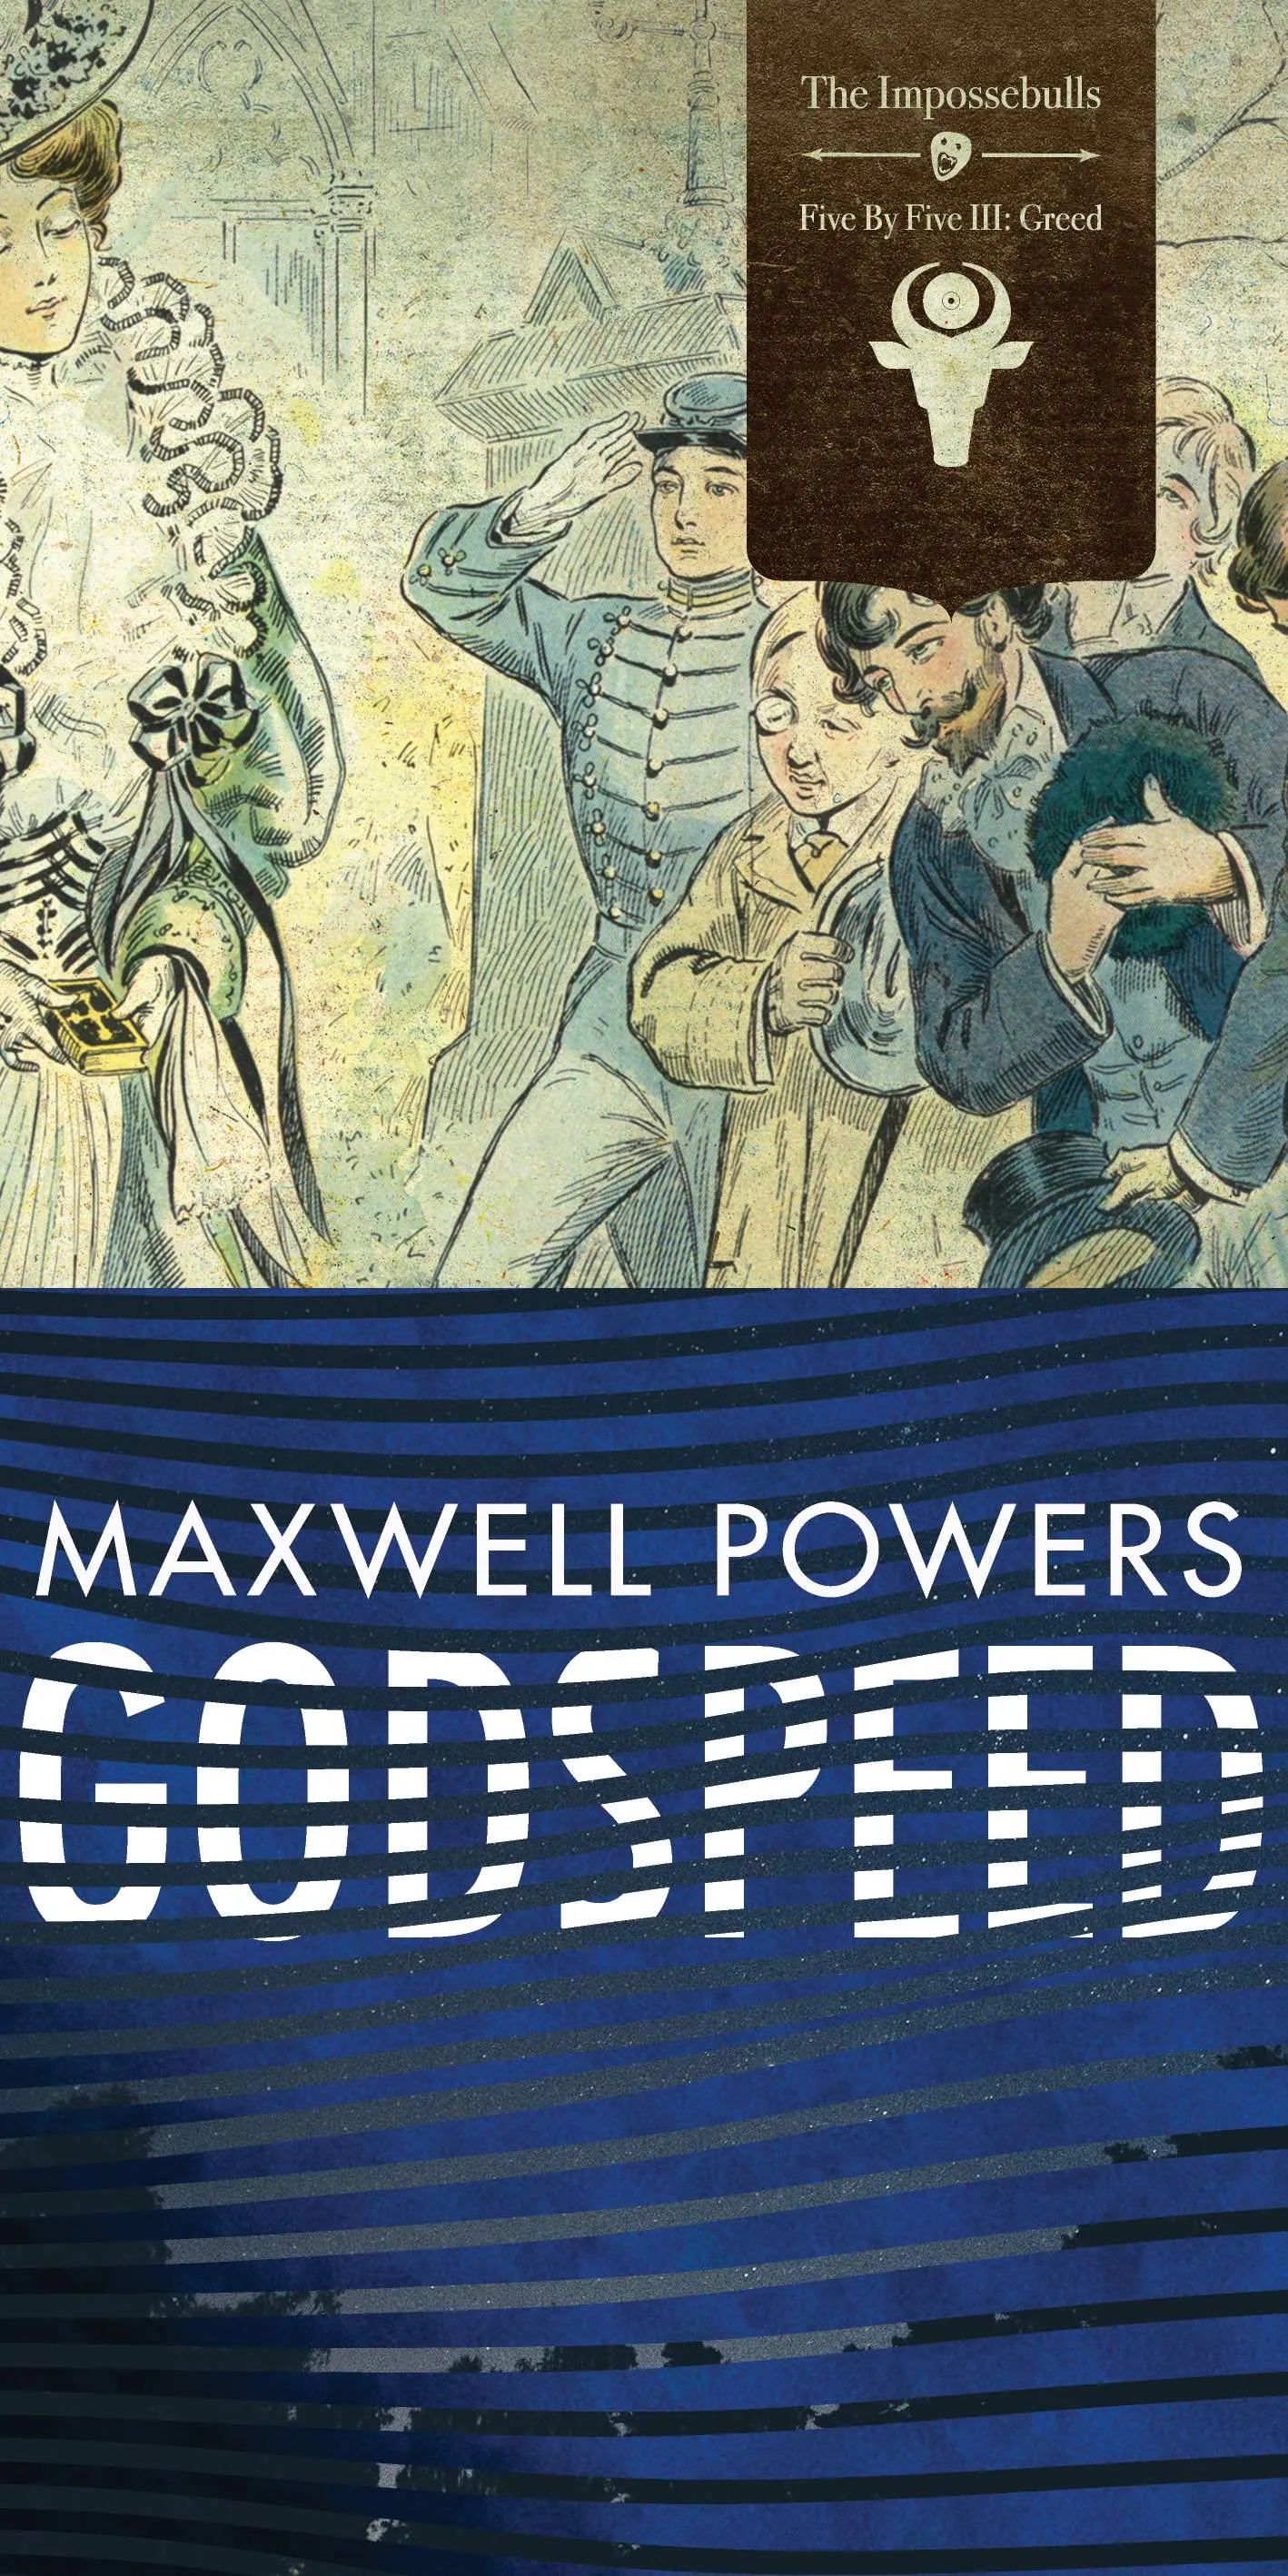 The Impossebulls and Maxwell Powers